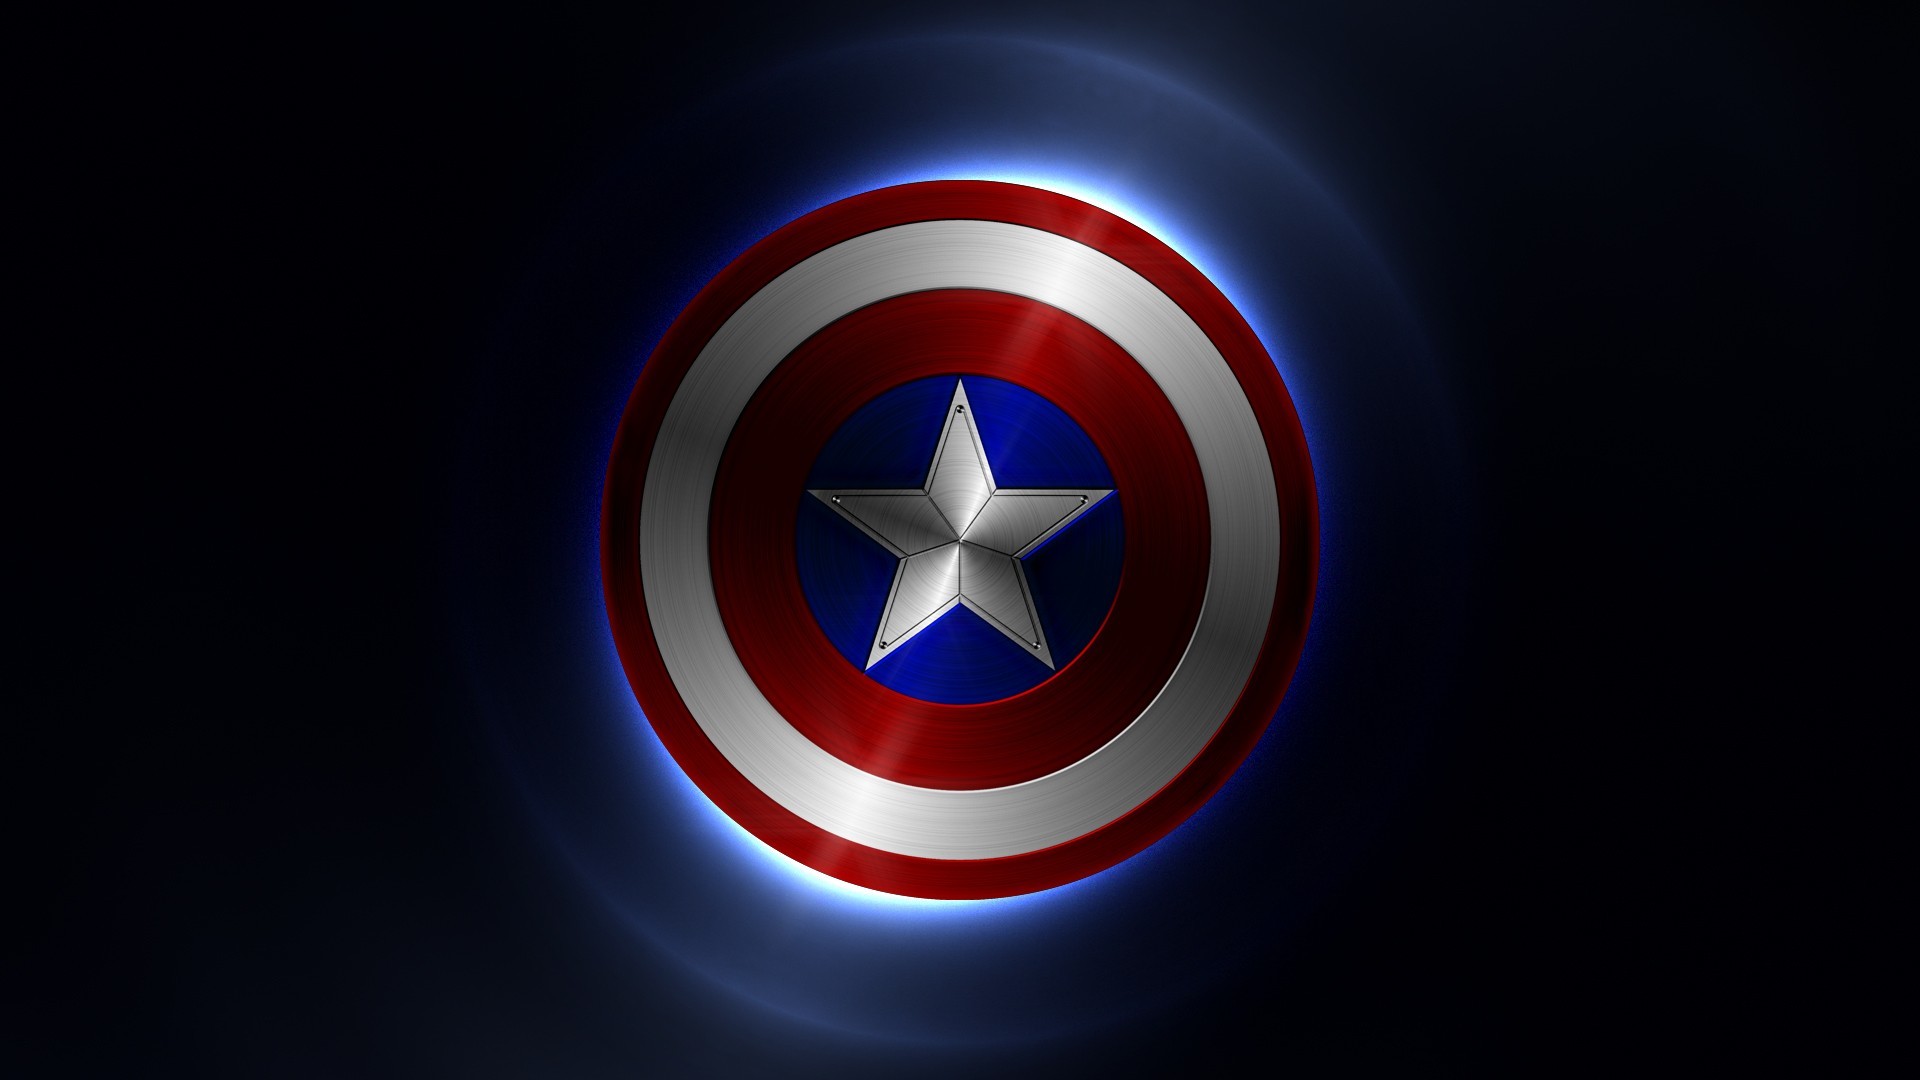 1920x1080 ... Captain America Wallpaper for PC | Full HD Pictures ...